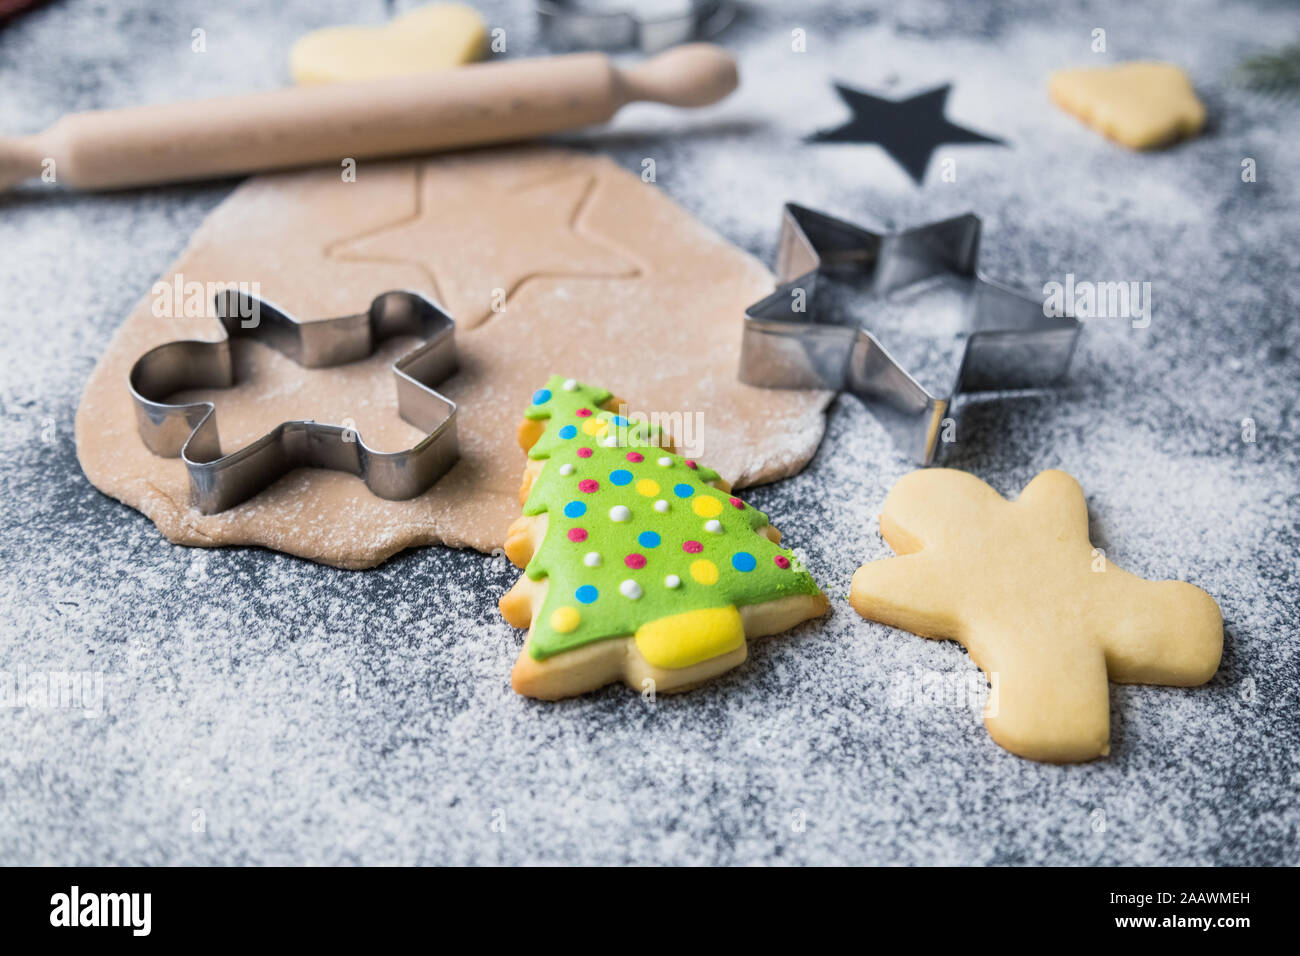 Making Christmas Cookies Concept Made Of Sugar Cutters Dough Rolling Pin And Biscuit With Colorful Icing On Table Stock Photo Alamy